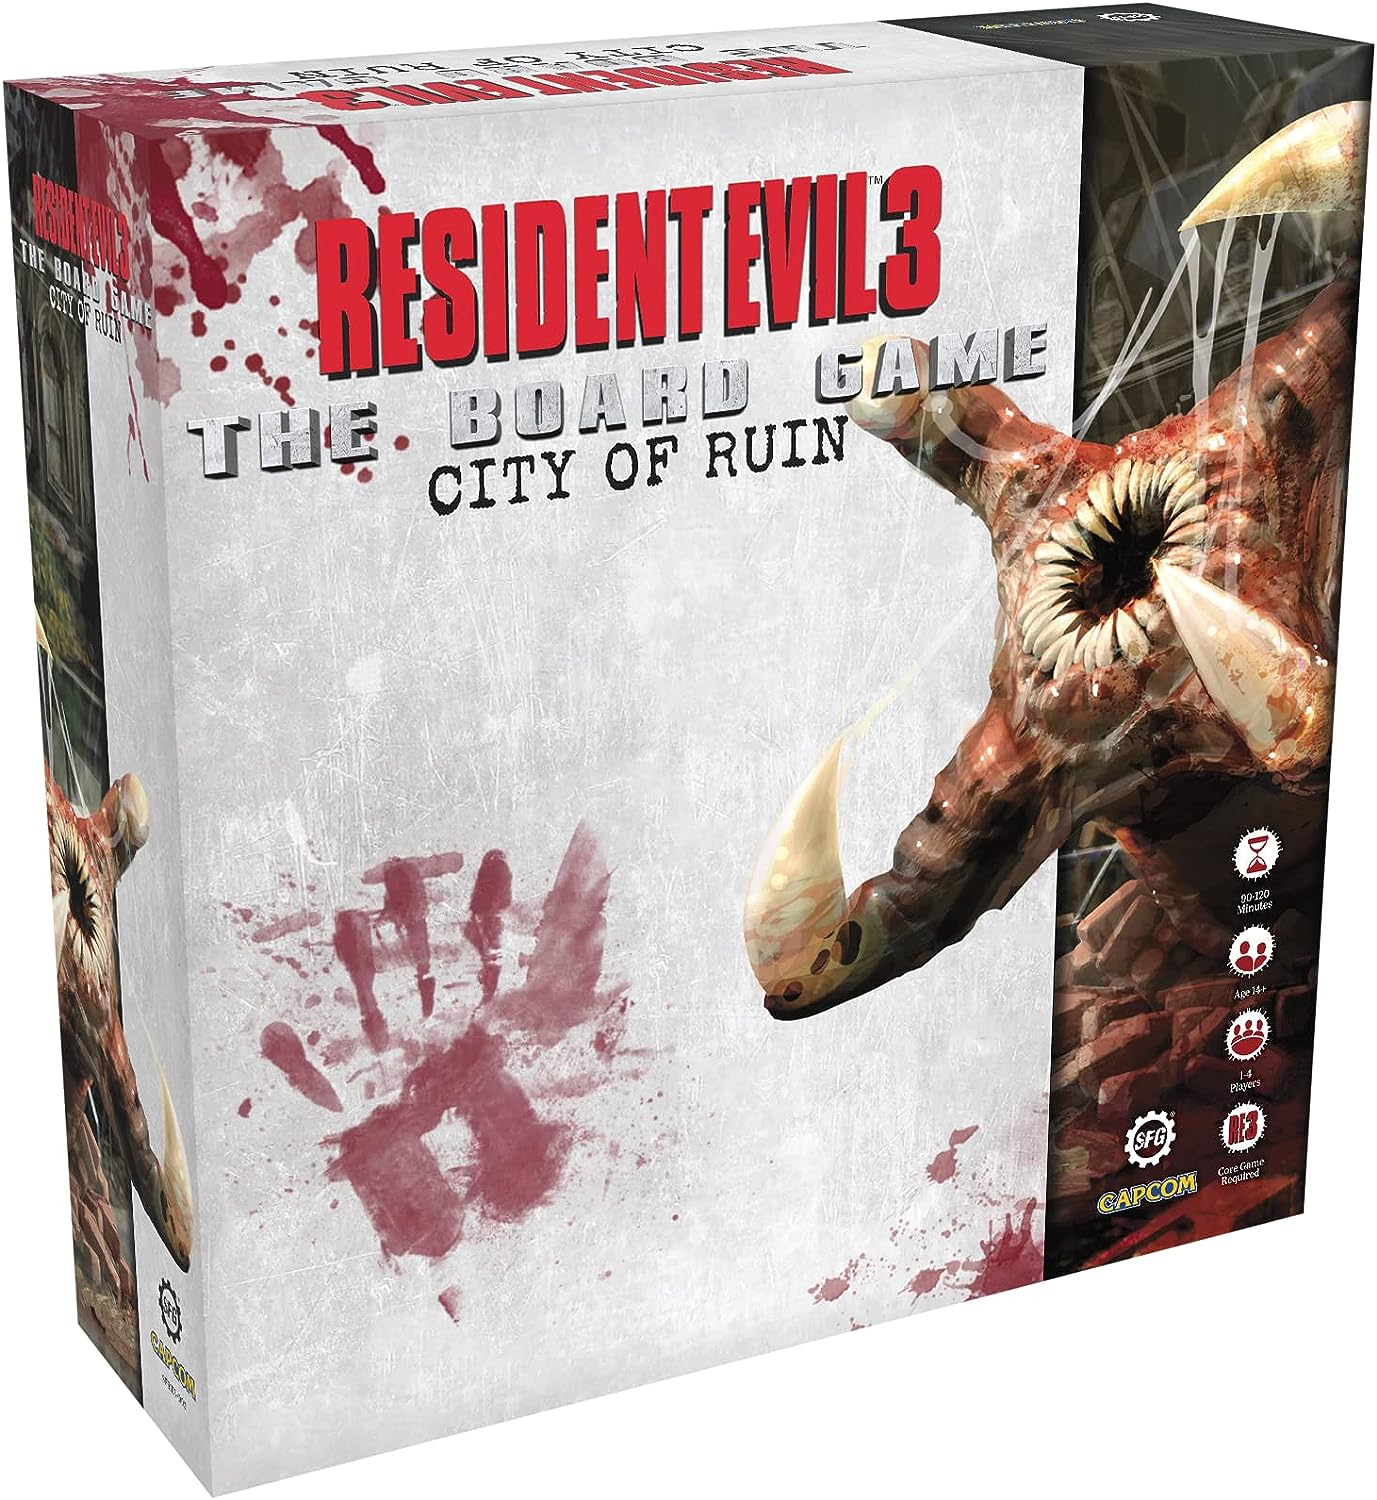 Resident Evil 3: The City of Ruin Expansion